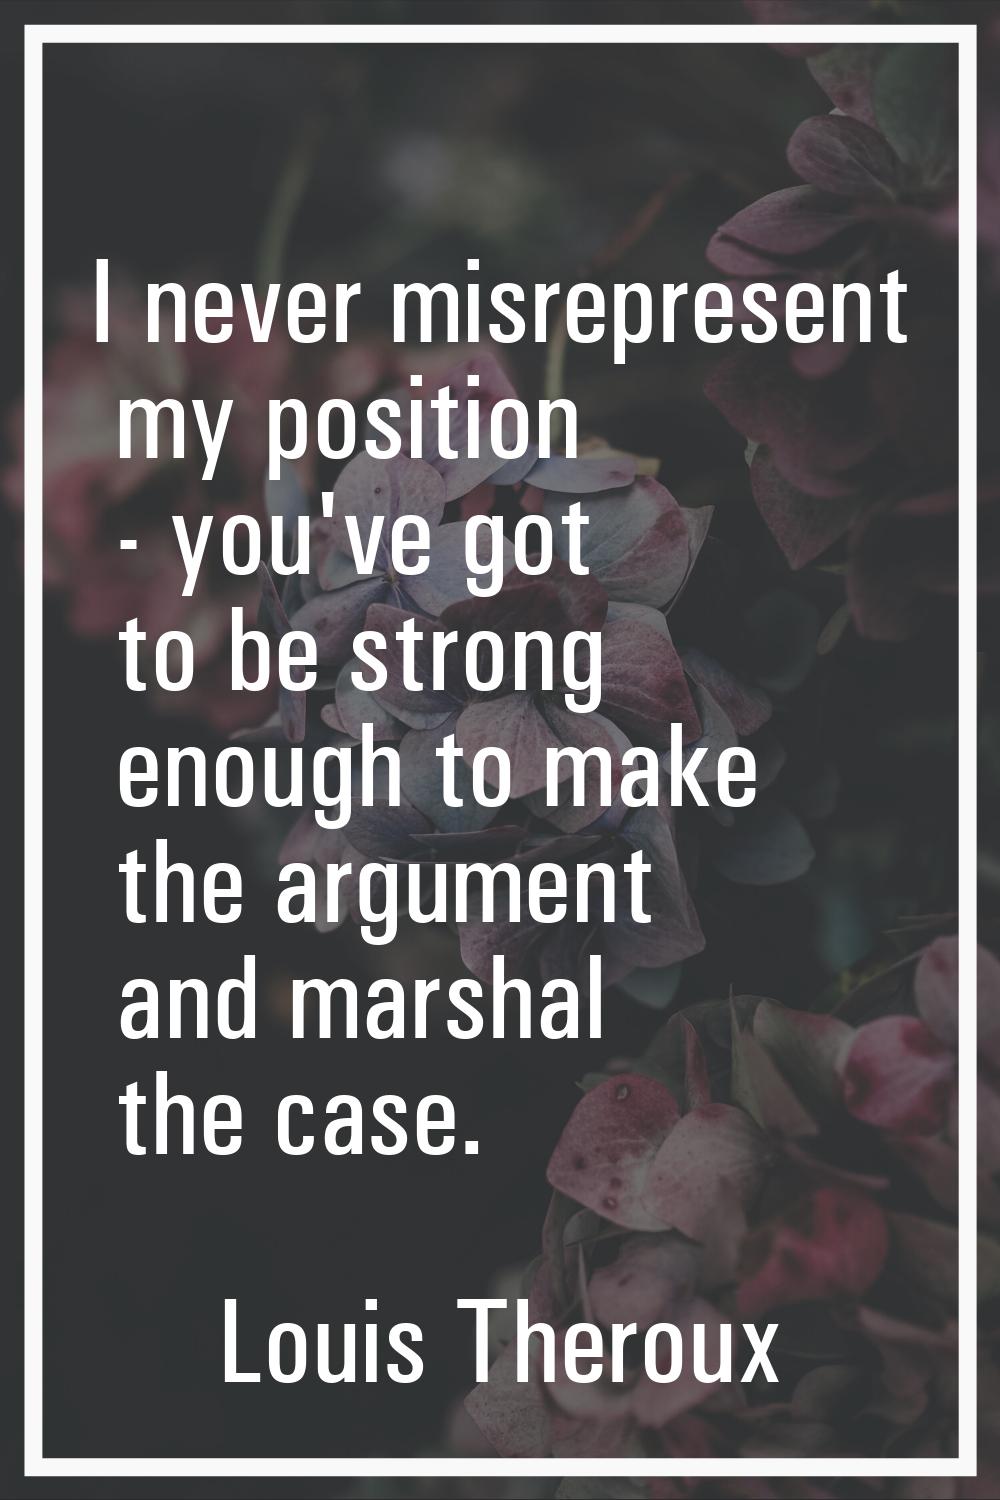 I never misrepresent my position - you've got to be strong enough to make the argument and marshal 